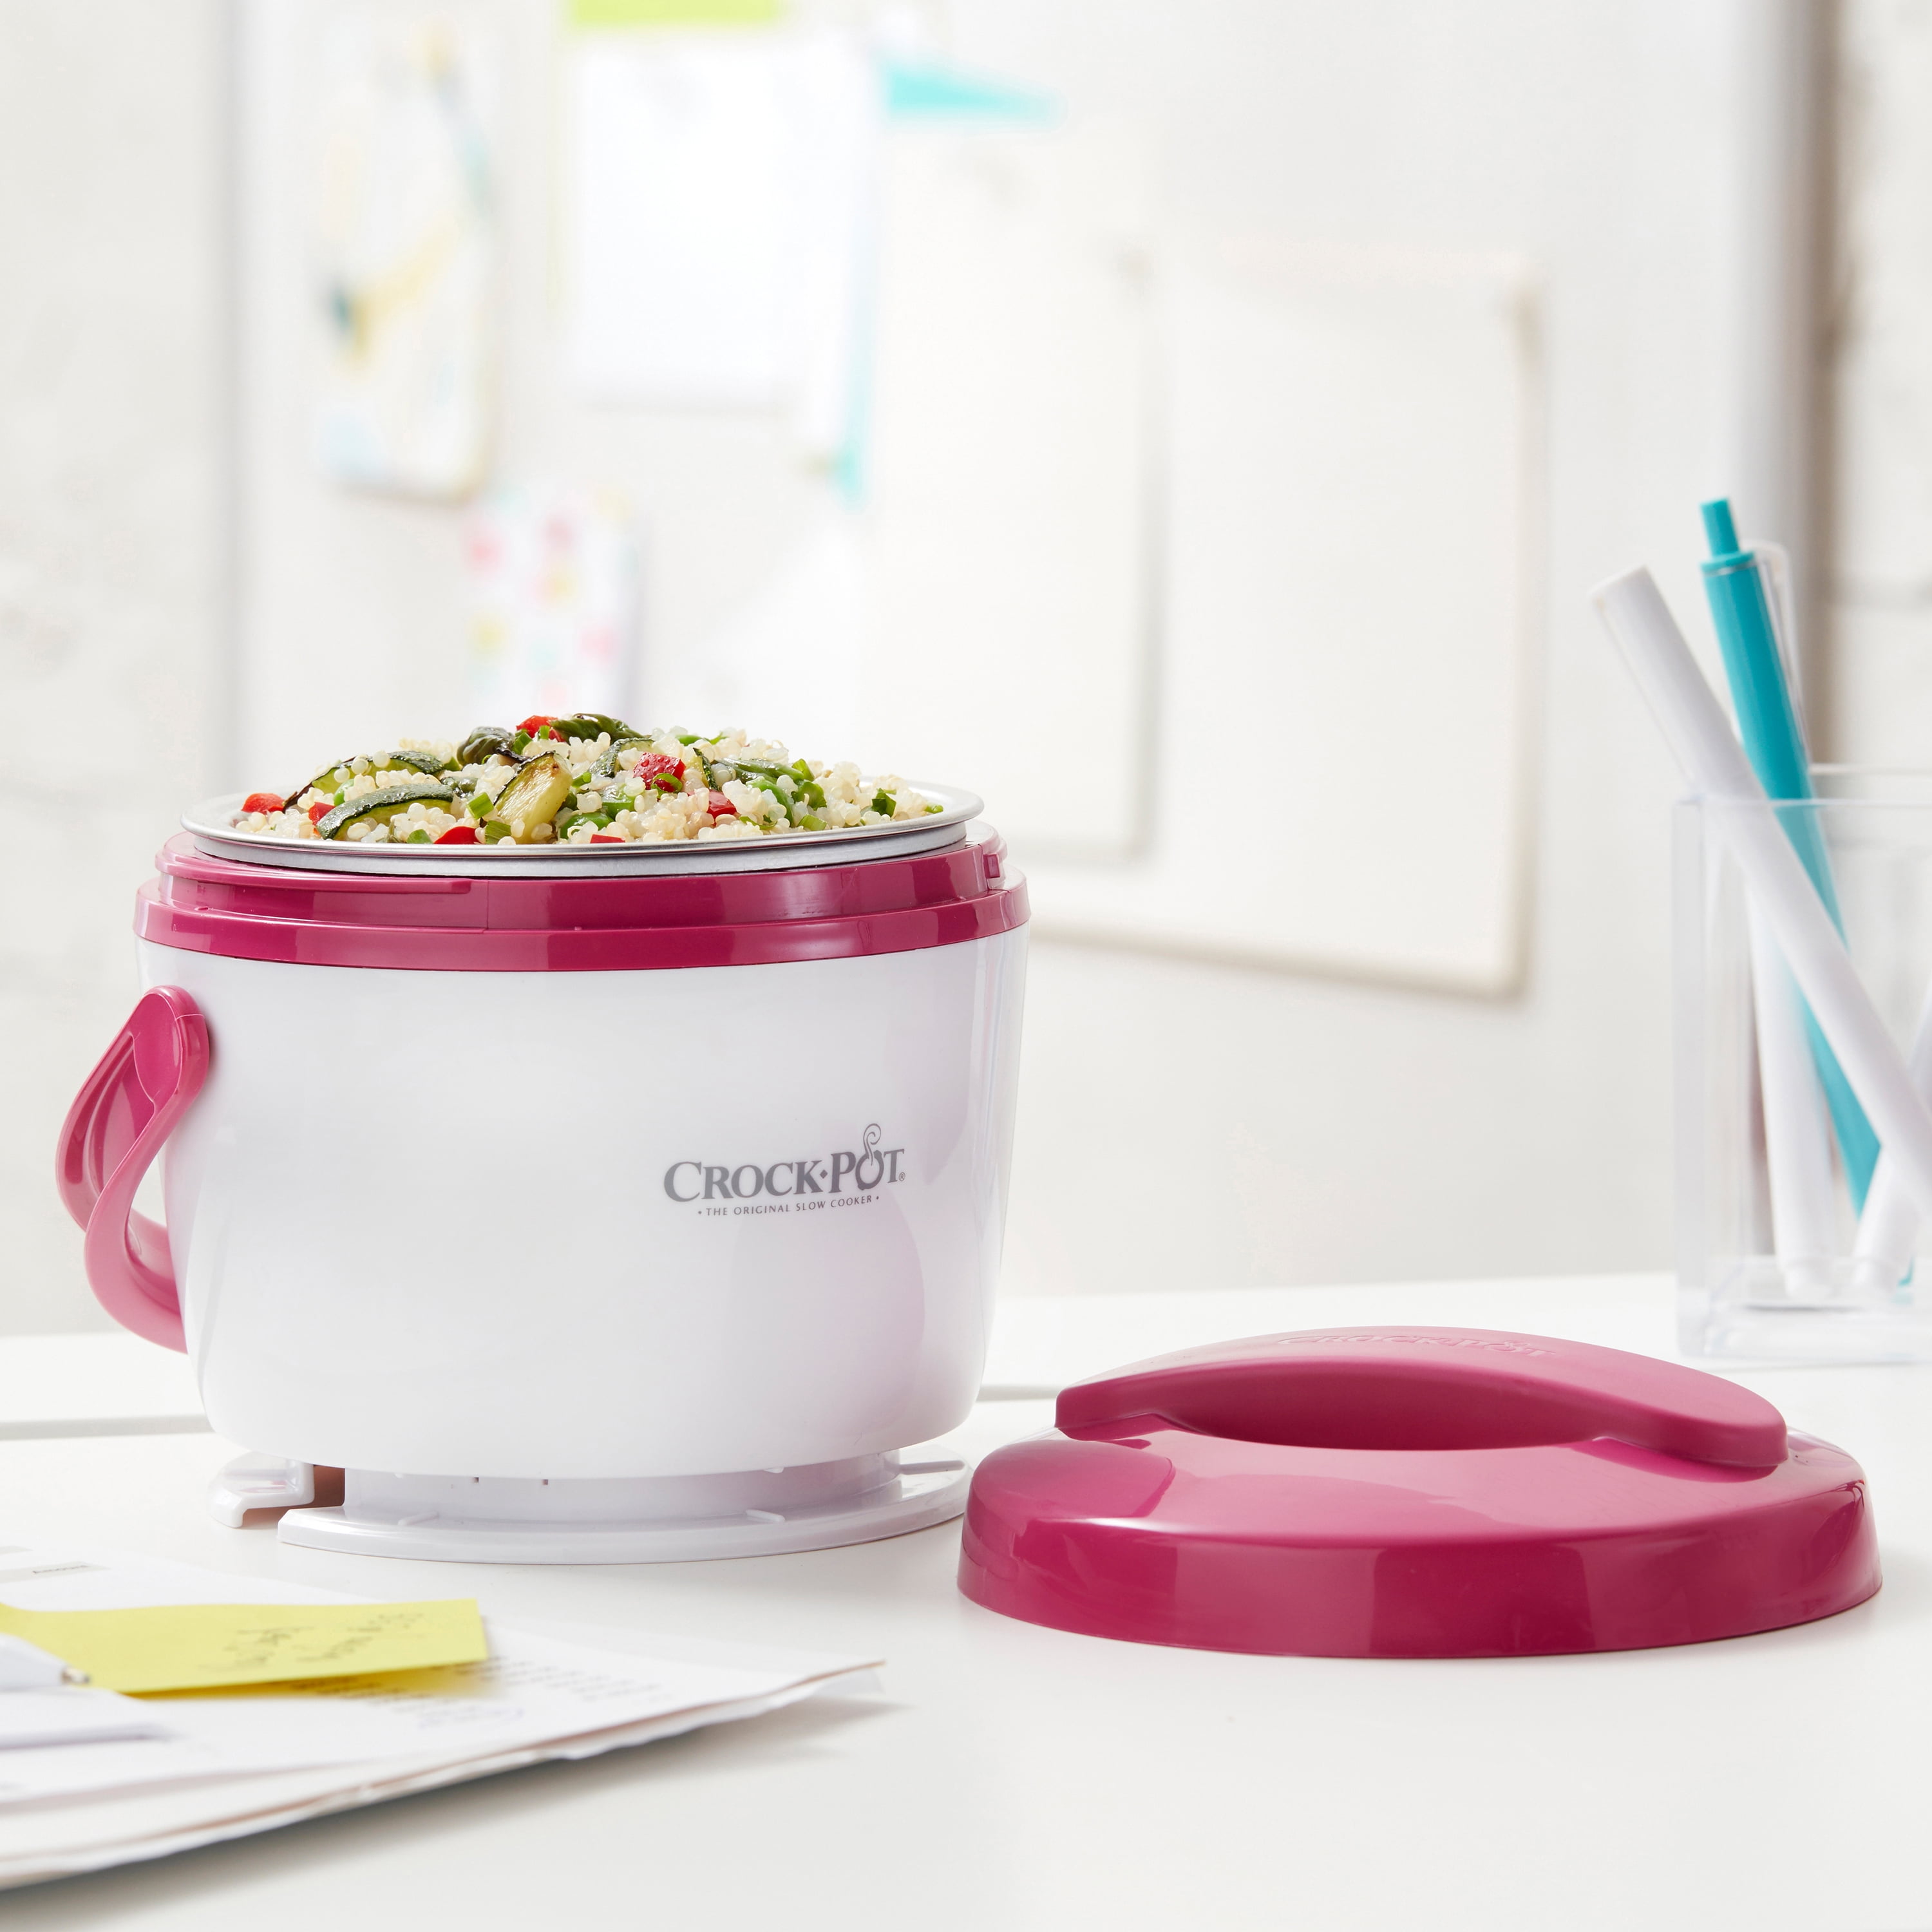 Crock-Pot 20 oz. Lunch Crock Food Warmer w/ 2 Containers with